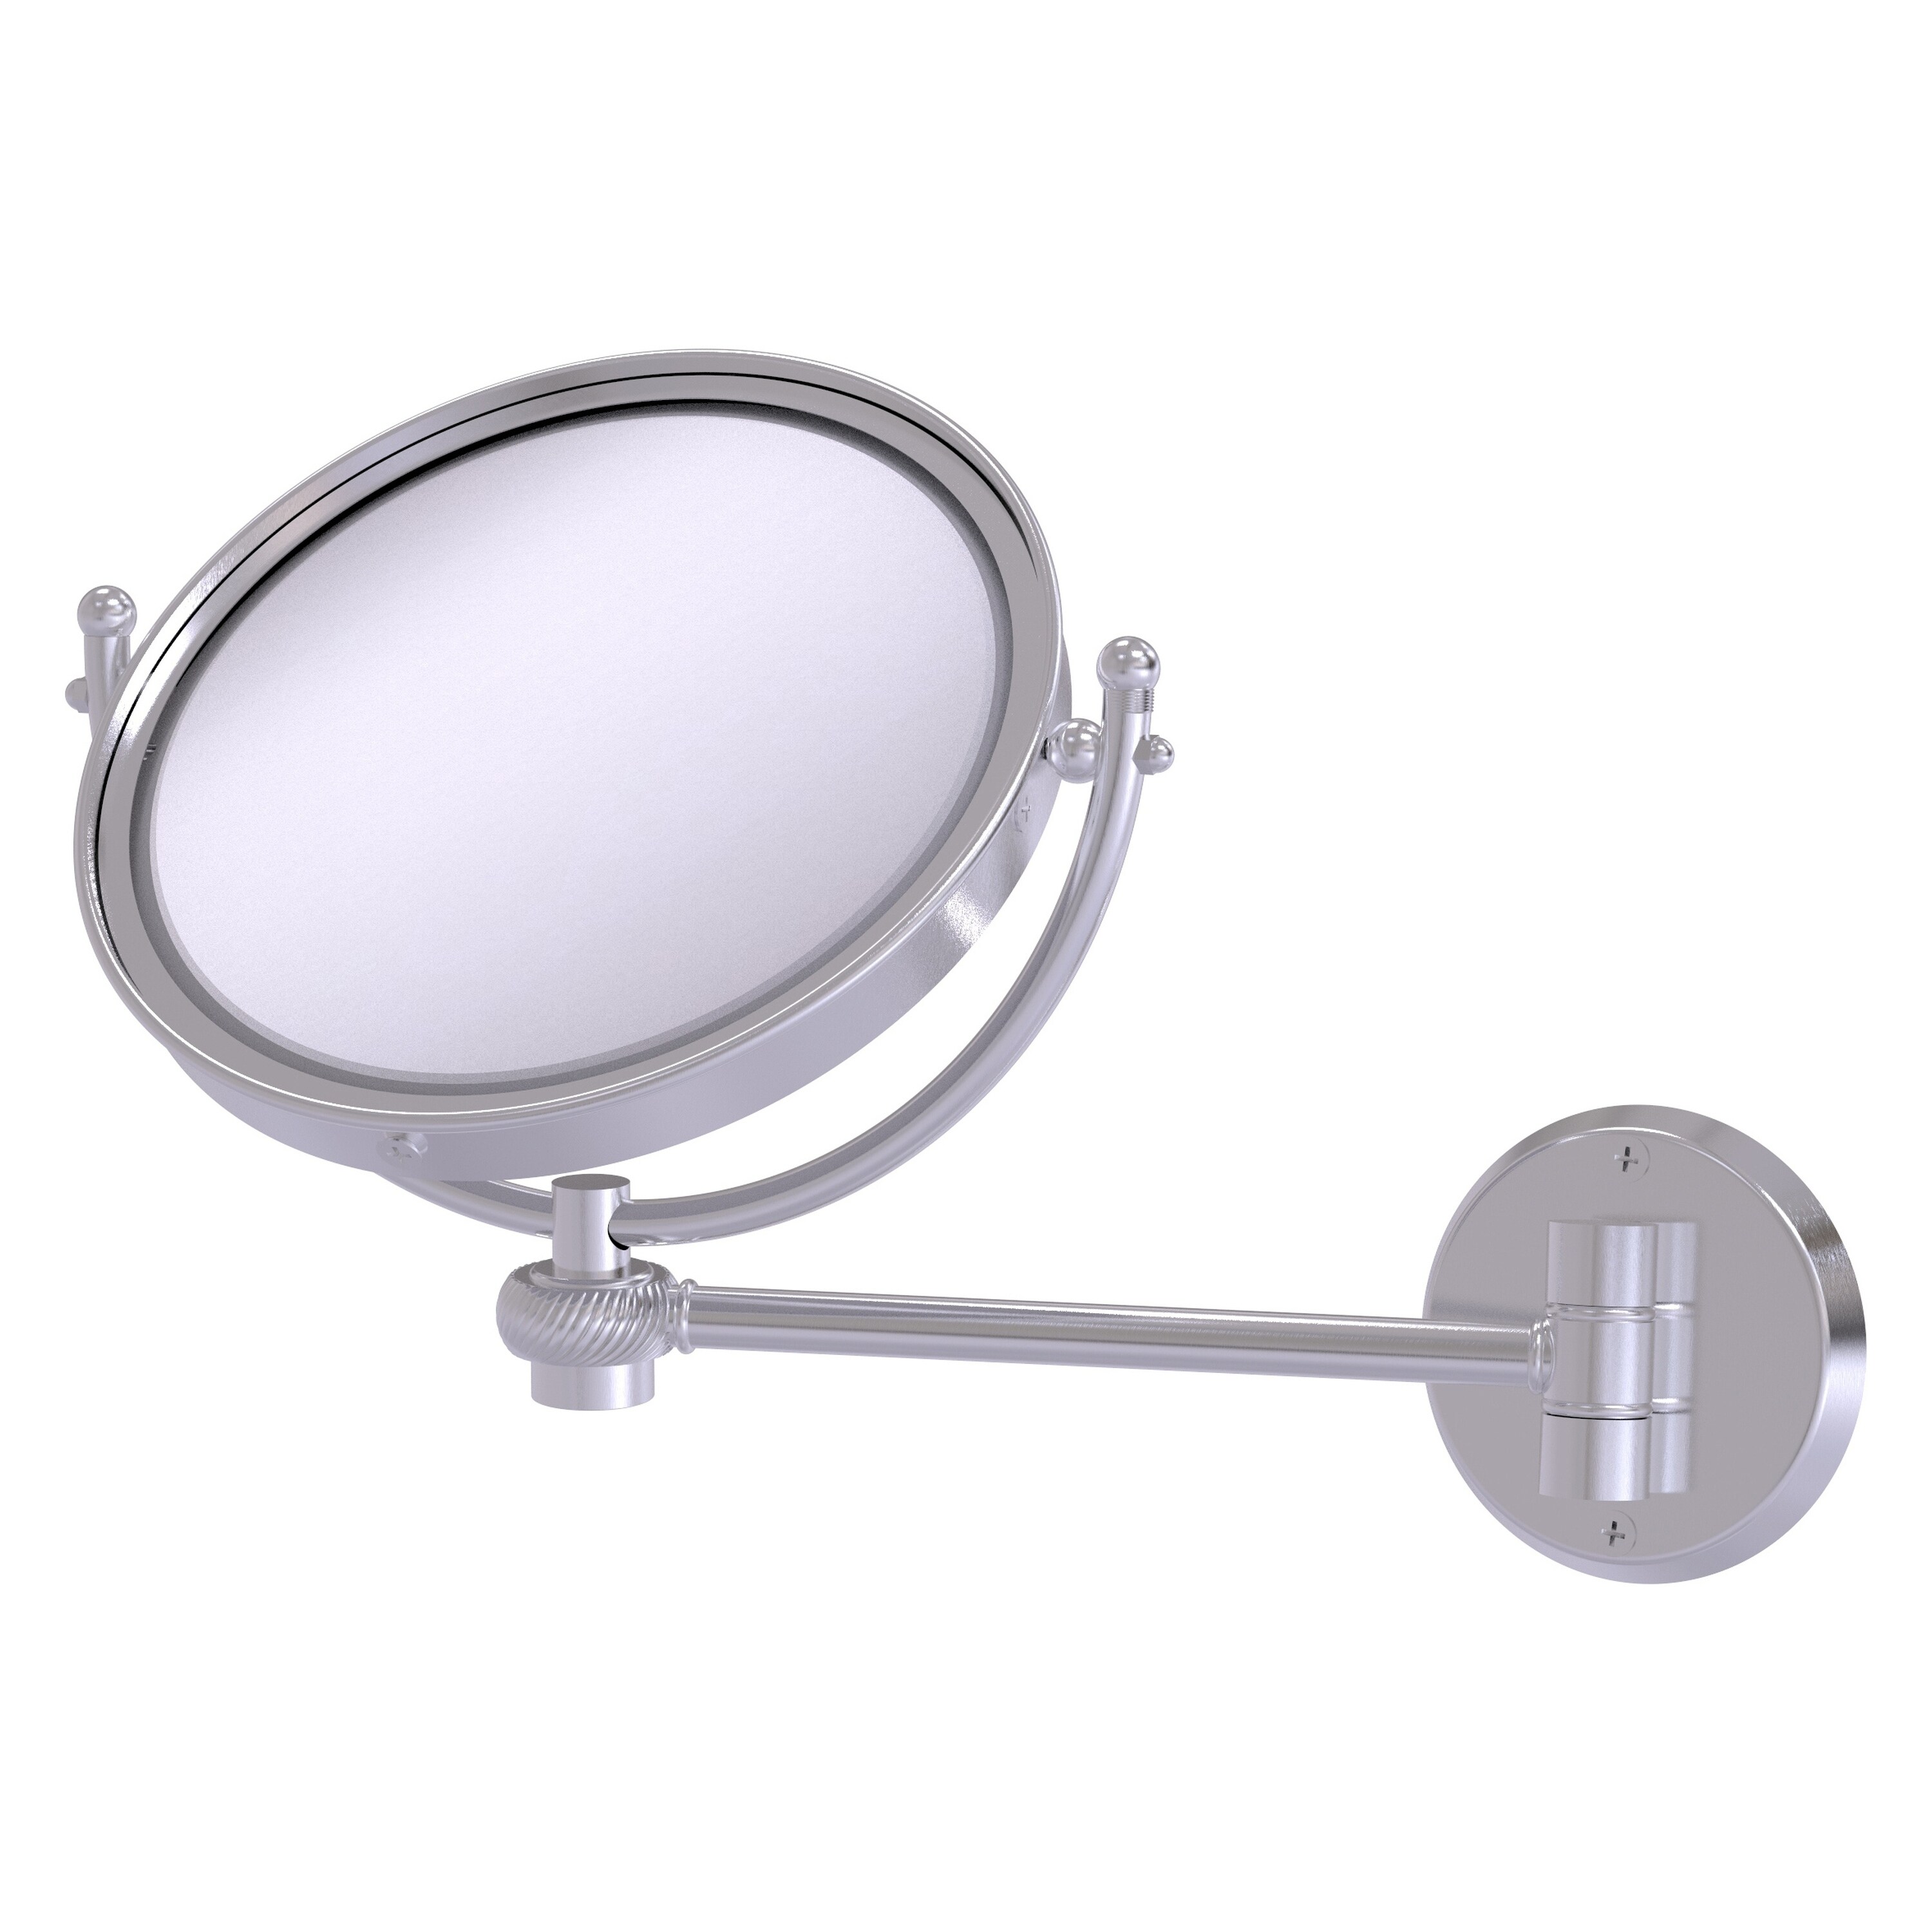 8-in x 10-in Satin Chrome Double-sided 3X Magnifying Wall-mounted Vanity Mirror | - Allied Brass WM-5T/3X-SCH